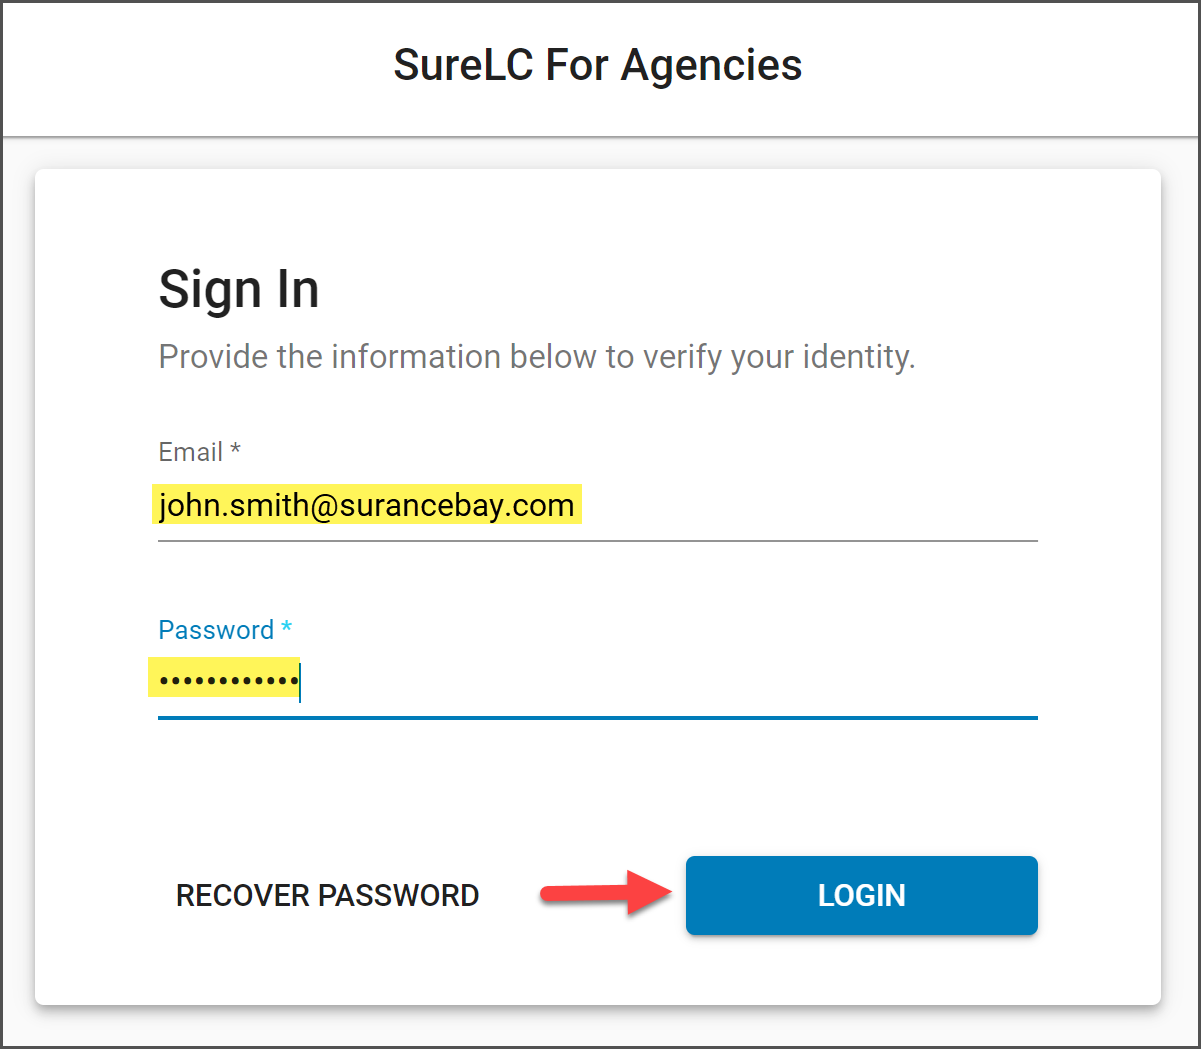 SureLC_One_for_Agencies_Login_Page.png